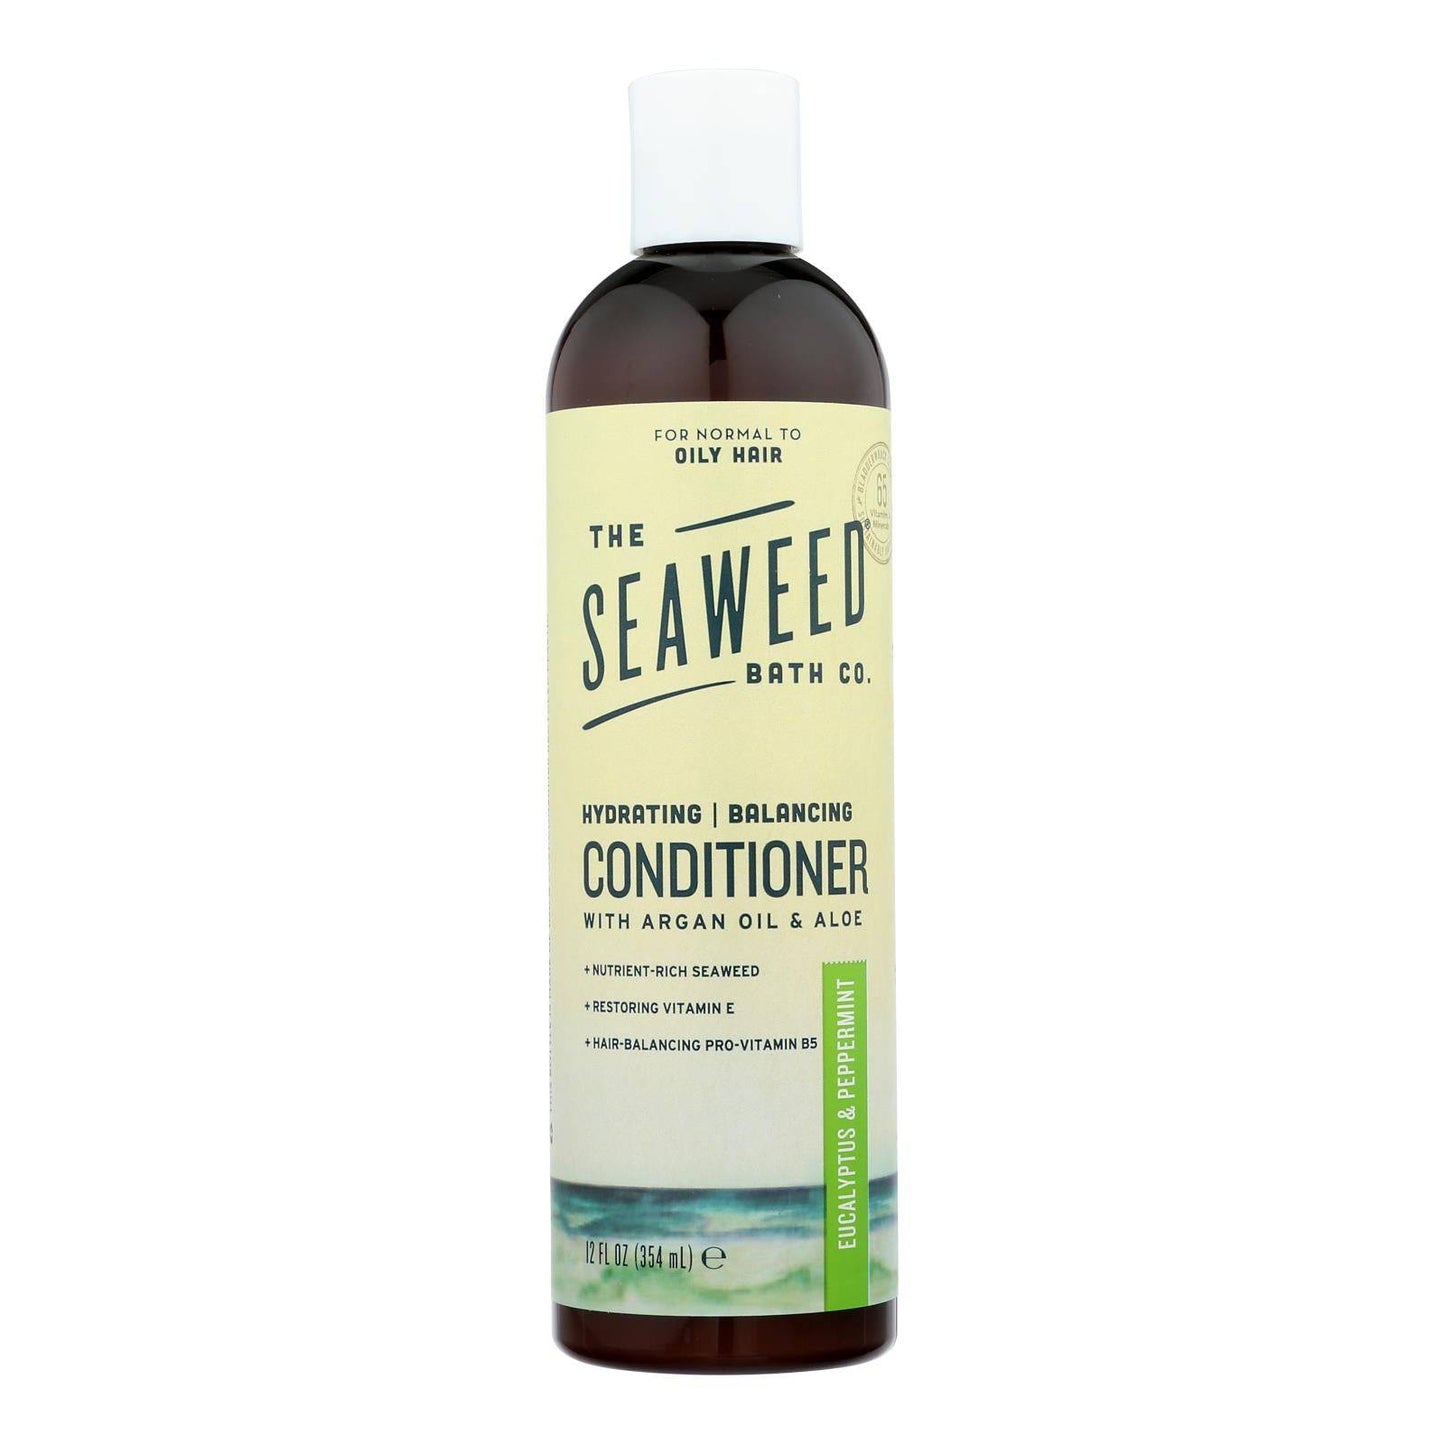 Buy The Seaweed Bath Co Conditioner - Balancing - Eucalyptus - Pepper - 12 Fl Oz  at OnlyNaturals.us